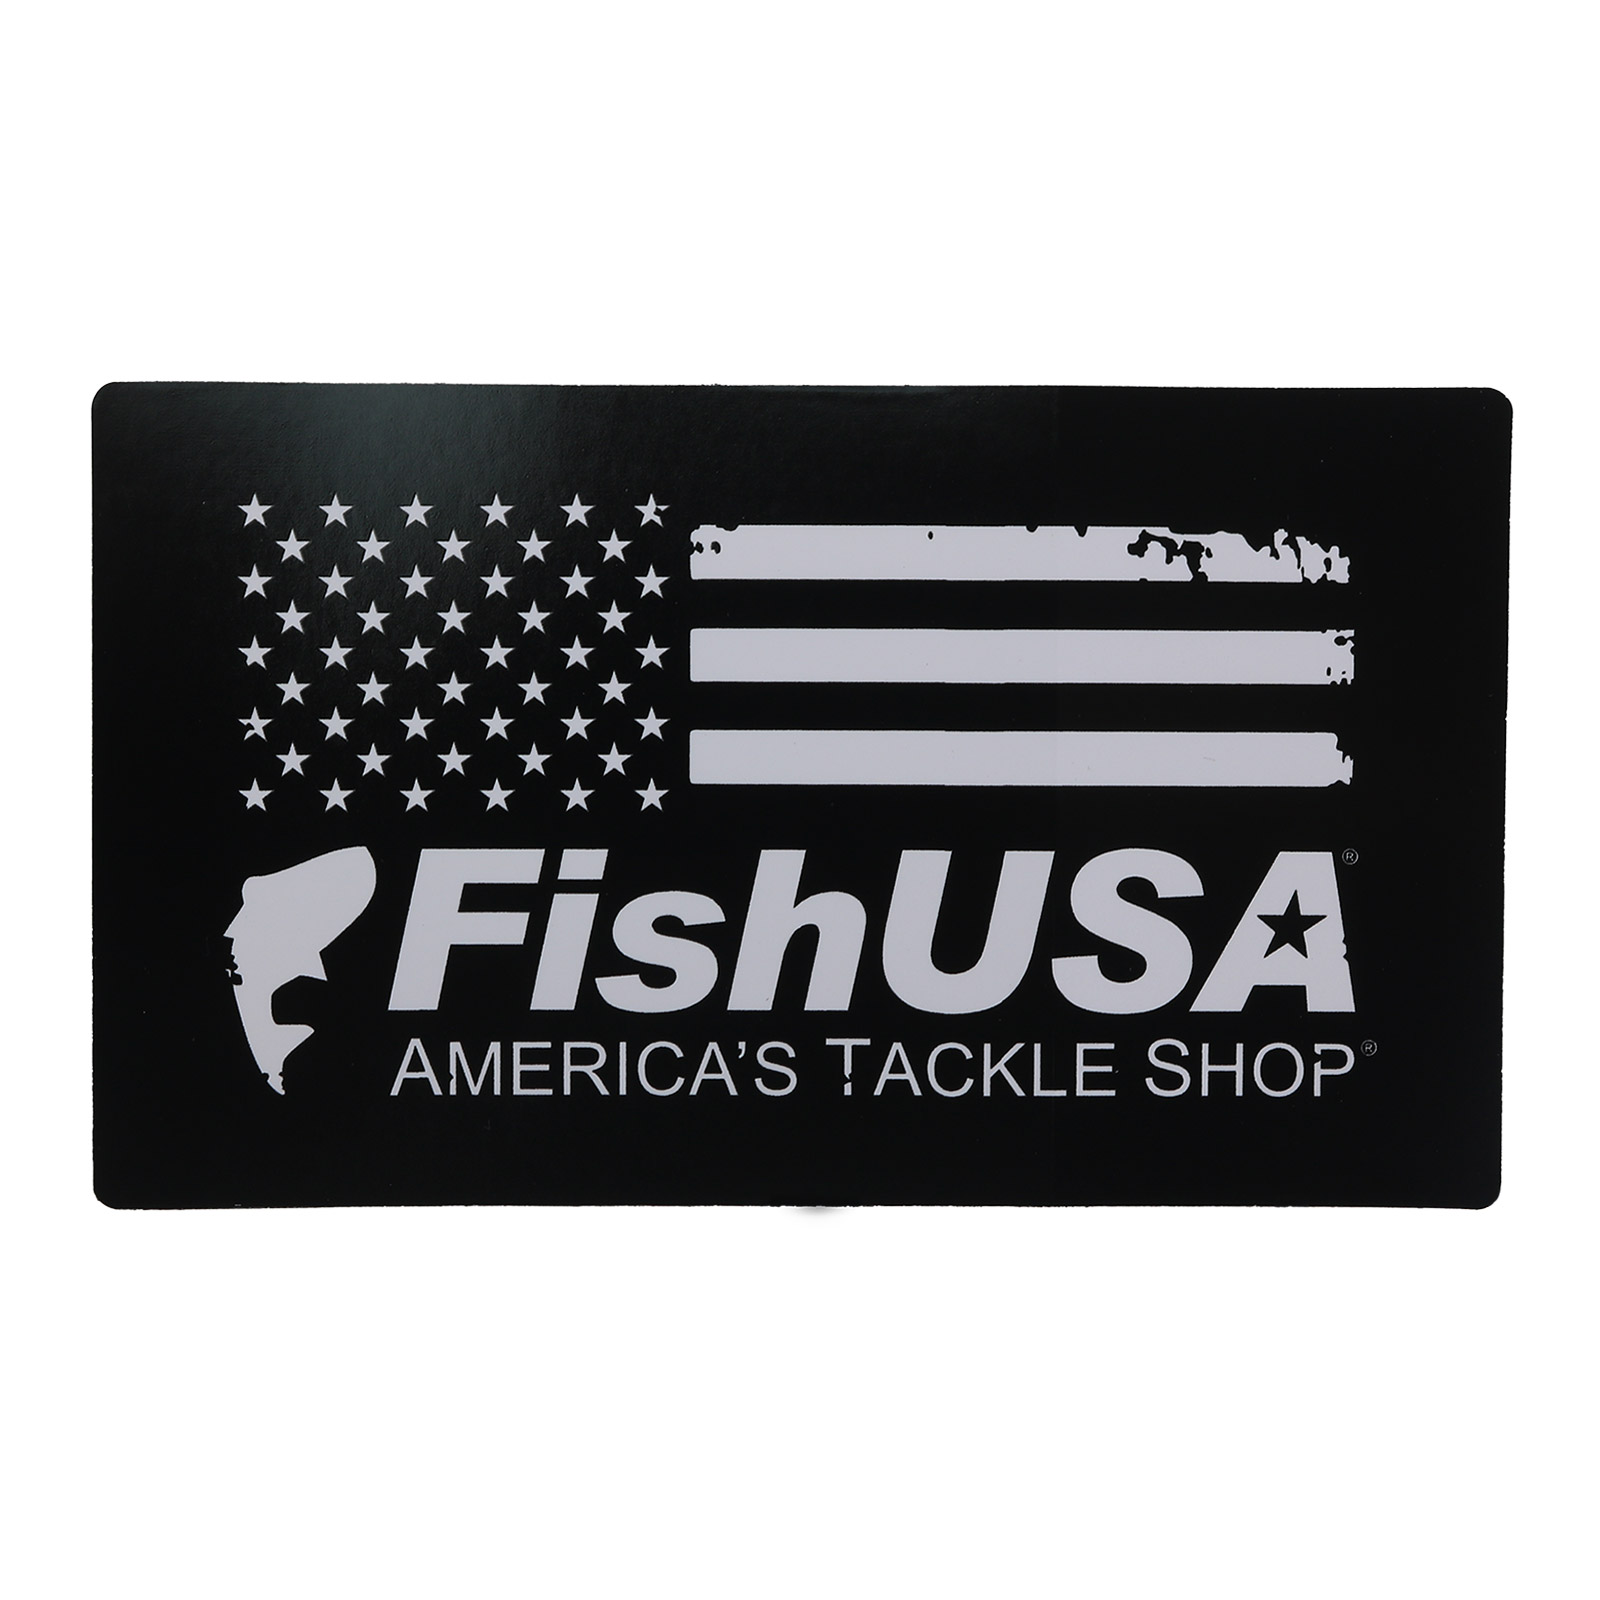 Daiwa Fishing Decals, Stickers & Patches for sale